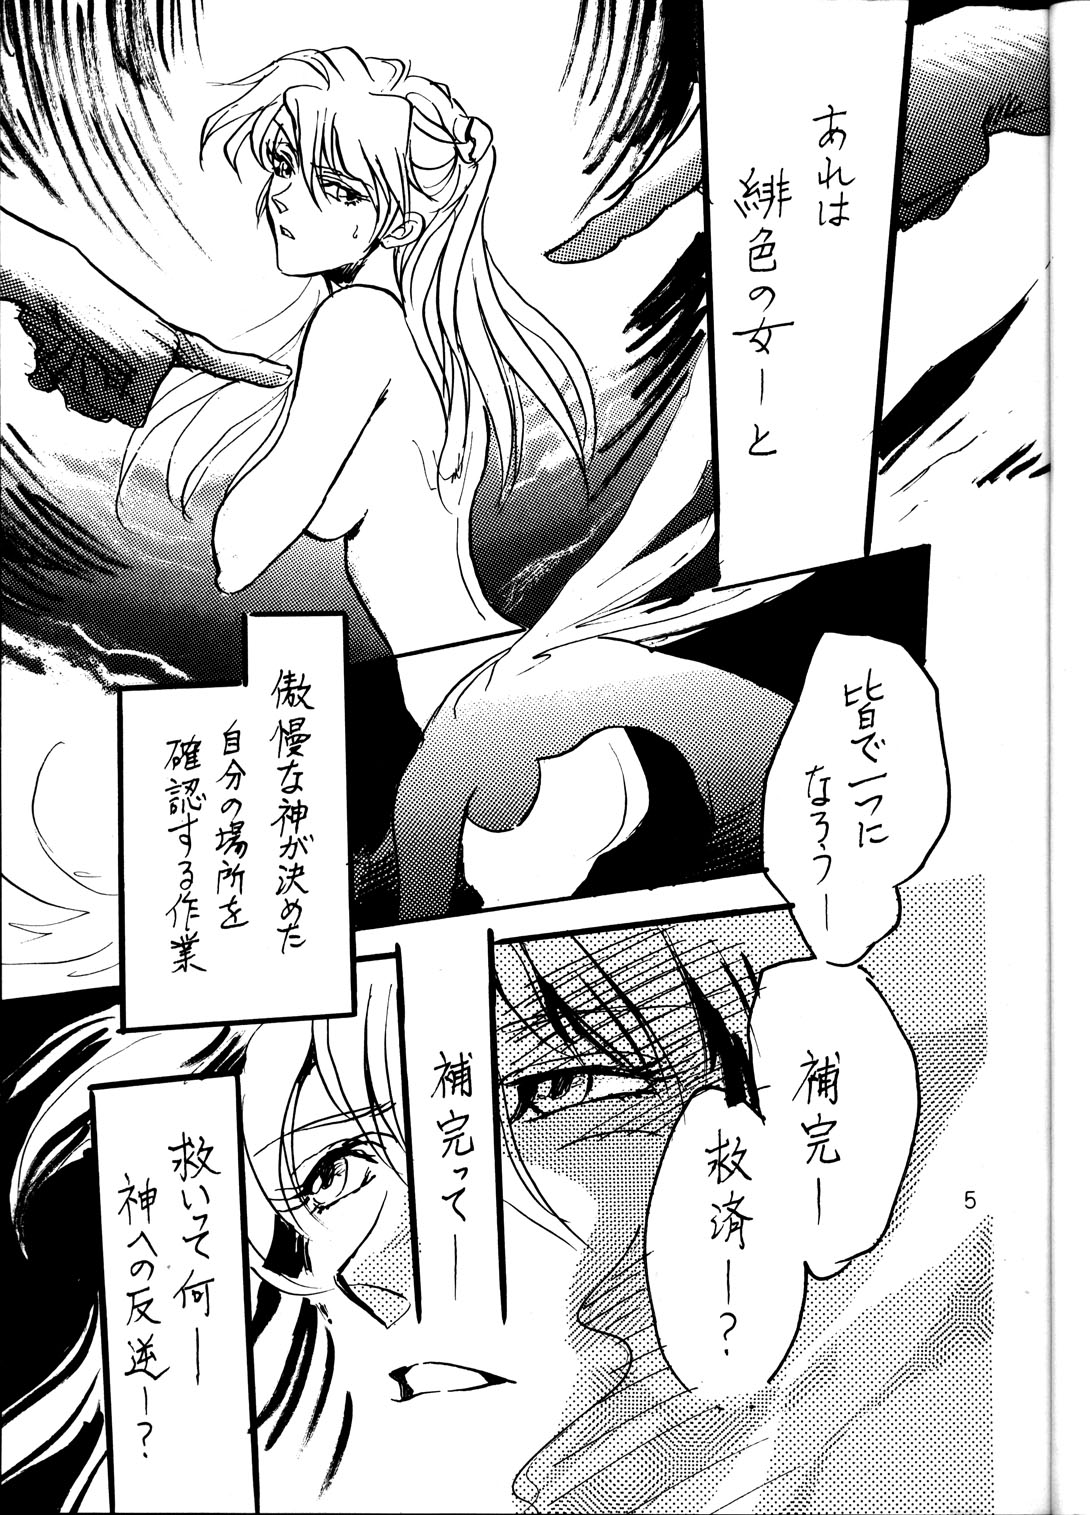 [Nabarl Doumei] Lonely Moon (Evangelion) page 4 full